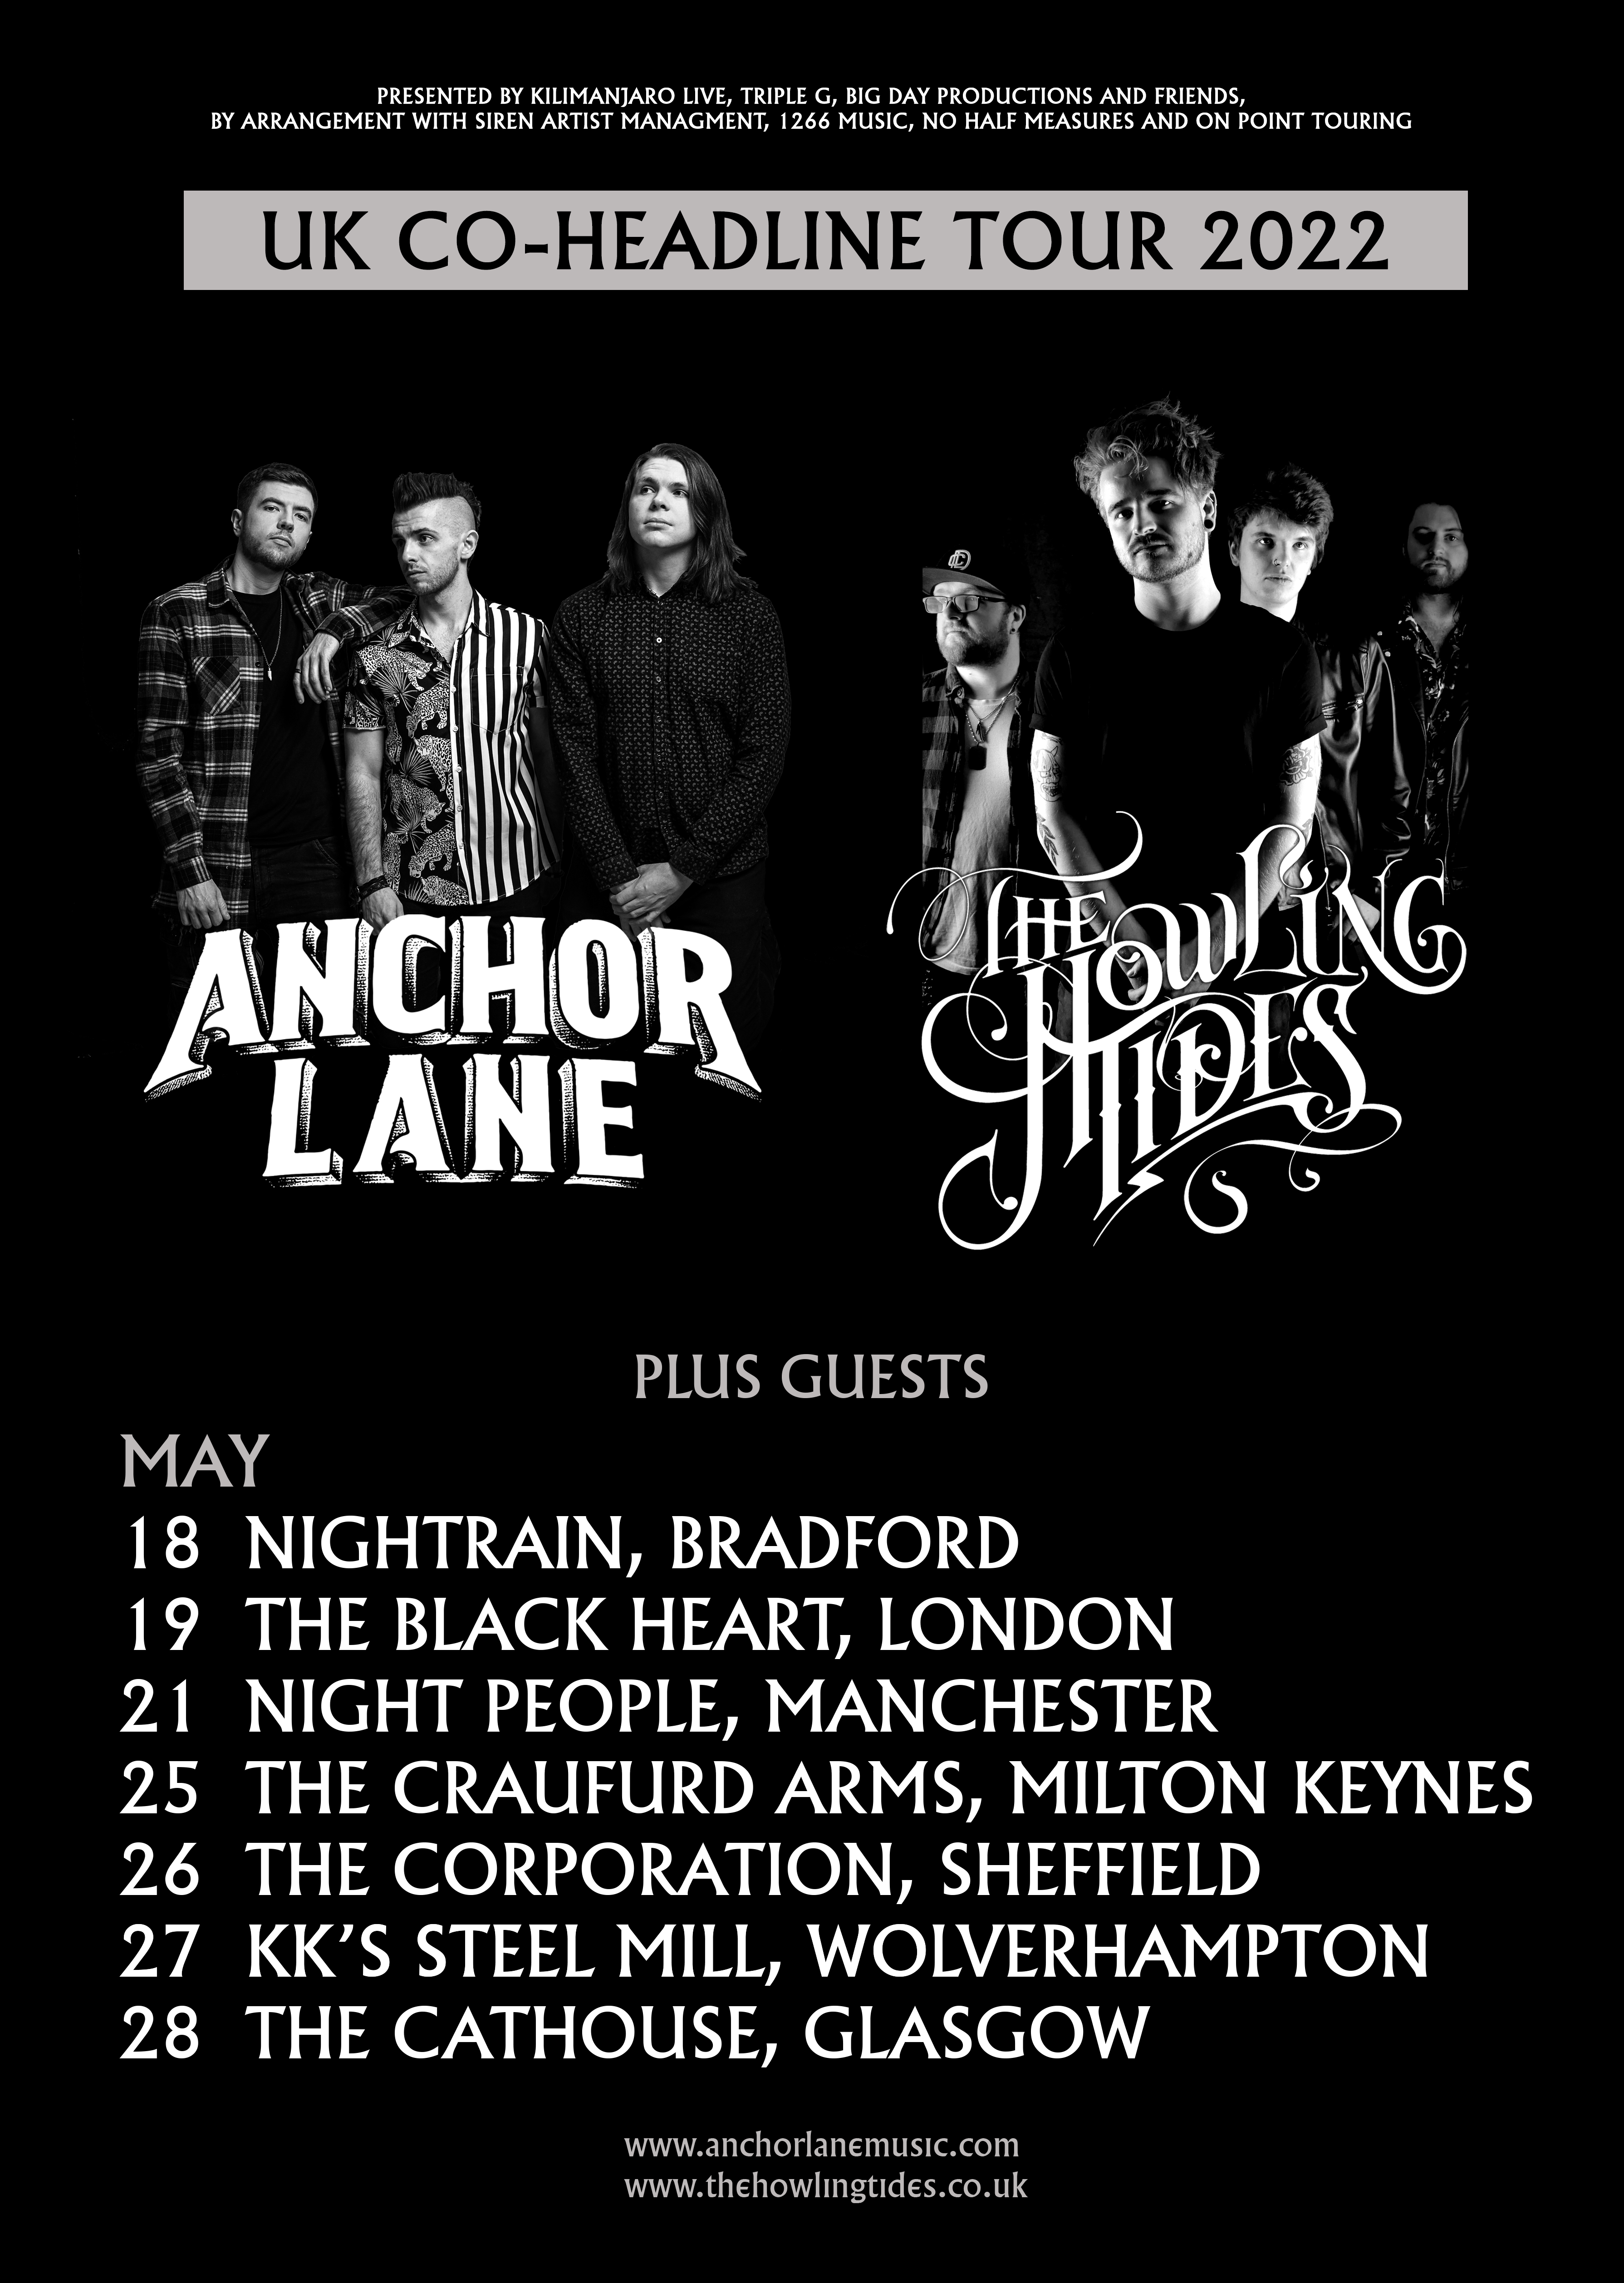 ANCHOR LANE ANNOUNCE CO-HEADLINE TOUR FOR MAY 2022